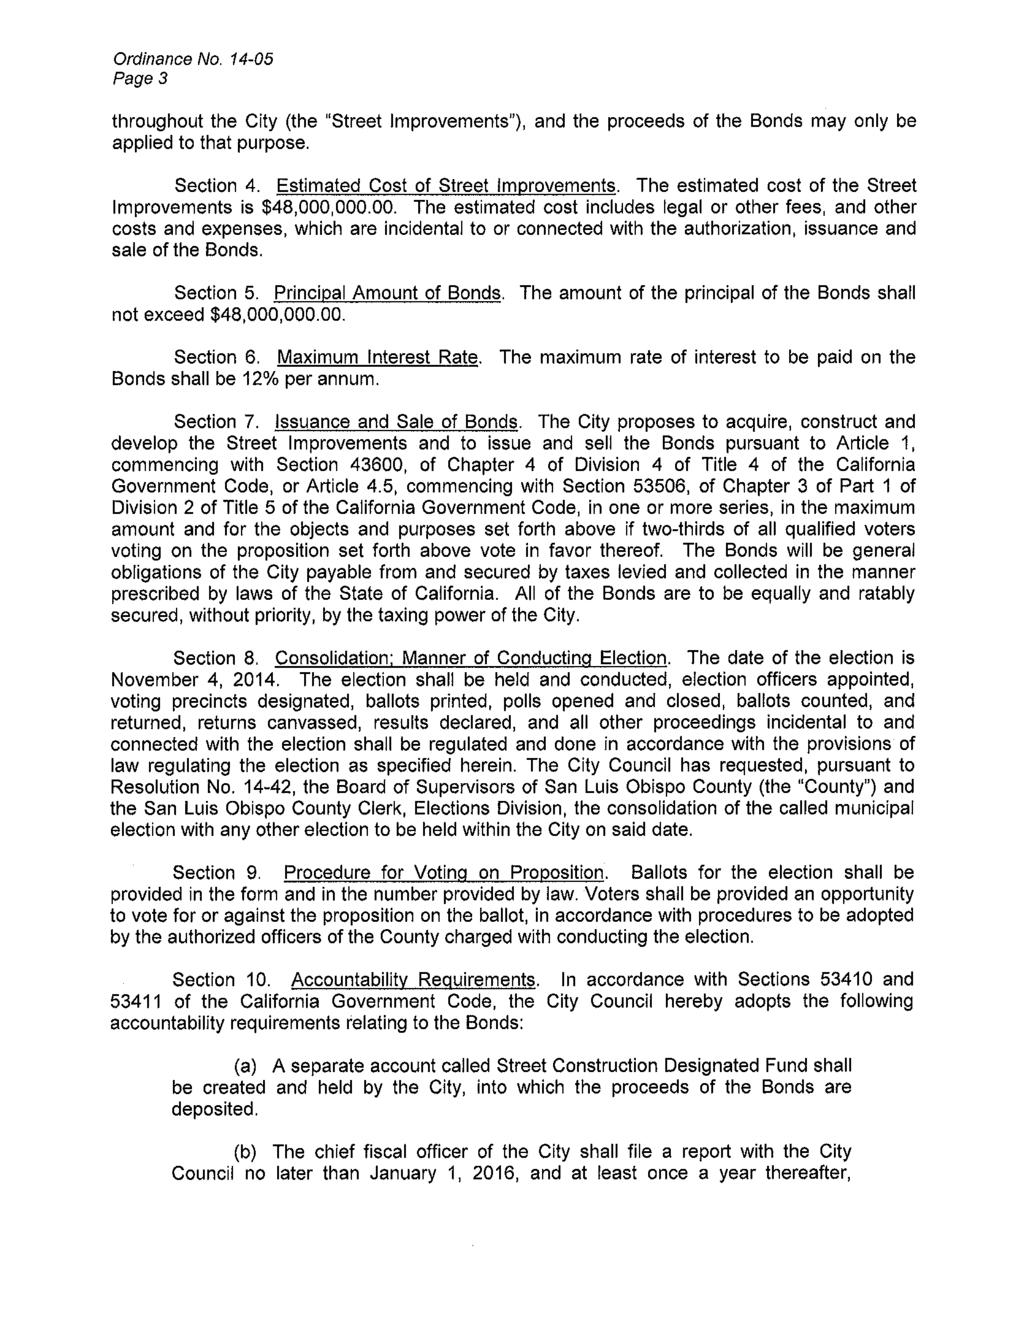 Ordinance No. 14-05 Page 3 throughout the City (the "Street Improvements"), and the proceeds of the Bonds may only be applied to that purpose. Section 4. Estimated Cost of Street Improvements.